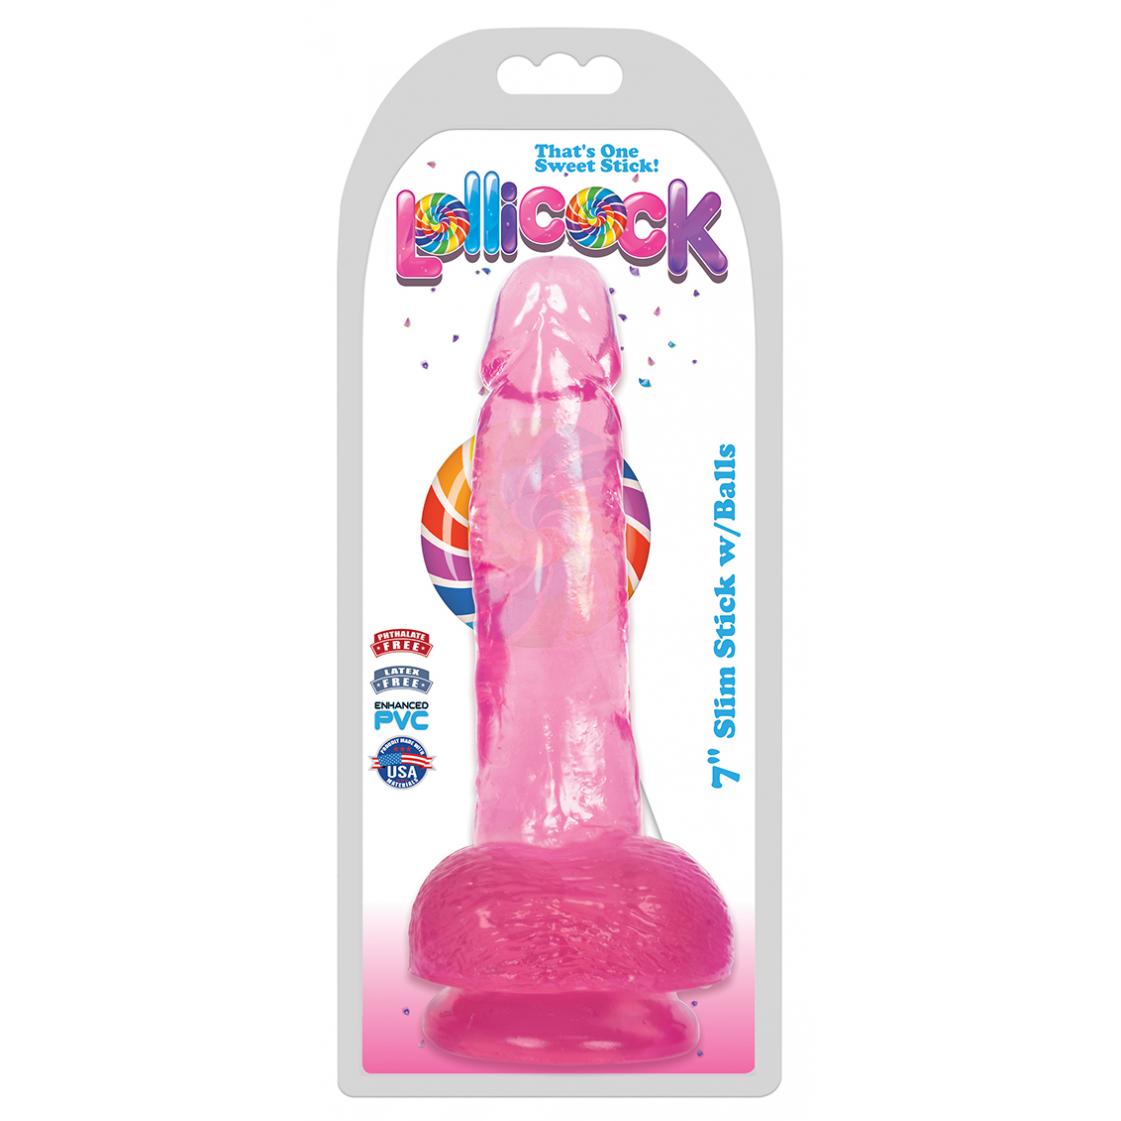 Curve Toys Lollicocks 7 Inch Slim Stick Dong with Balls Cherry Ice Pink CN 14 0513 33 643380985743 Boxview